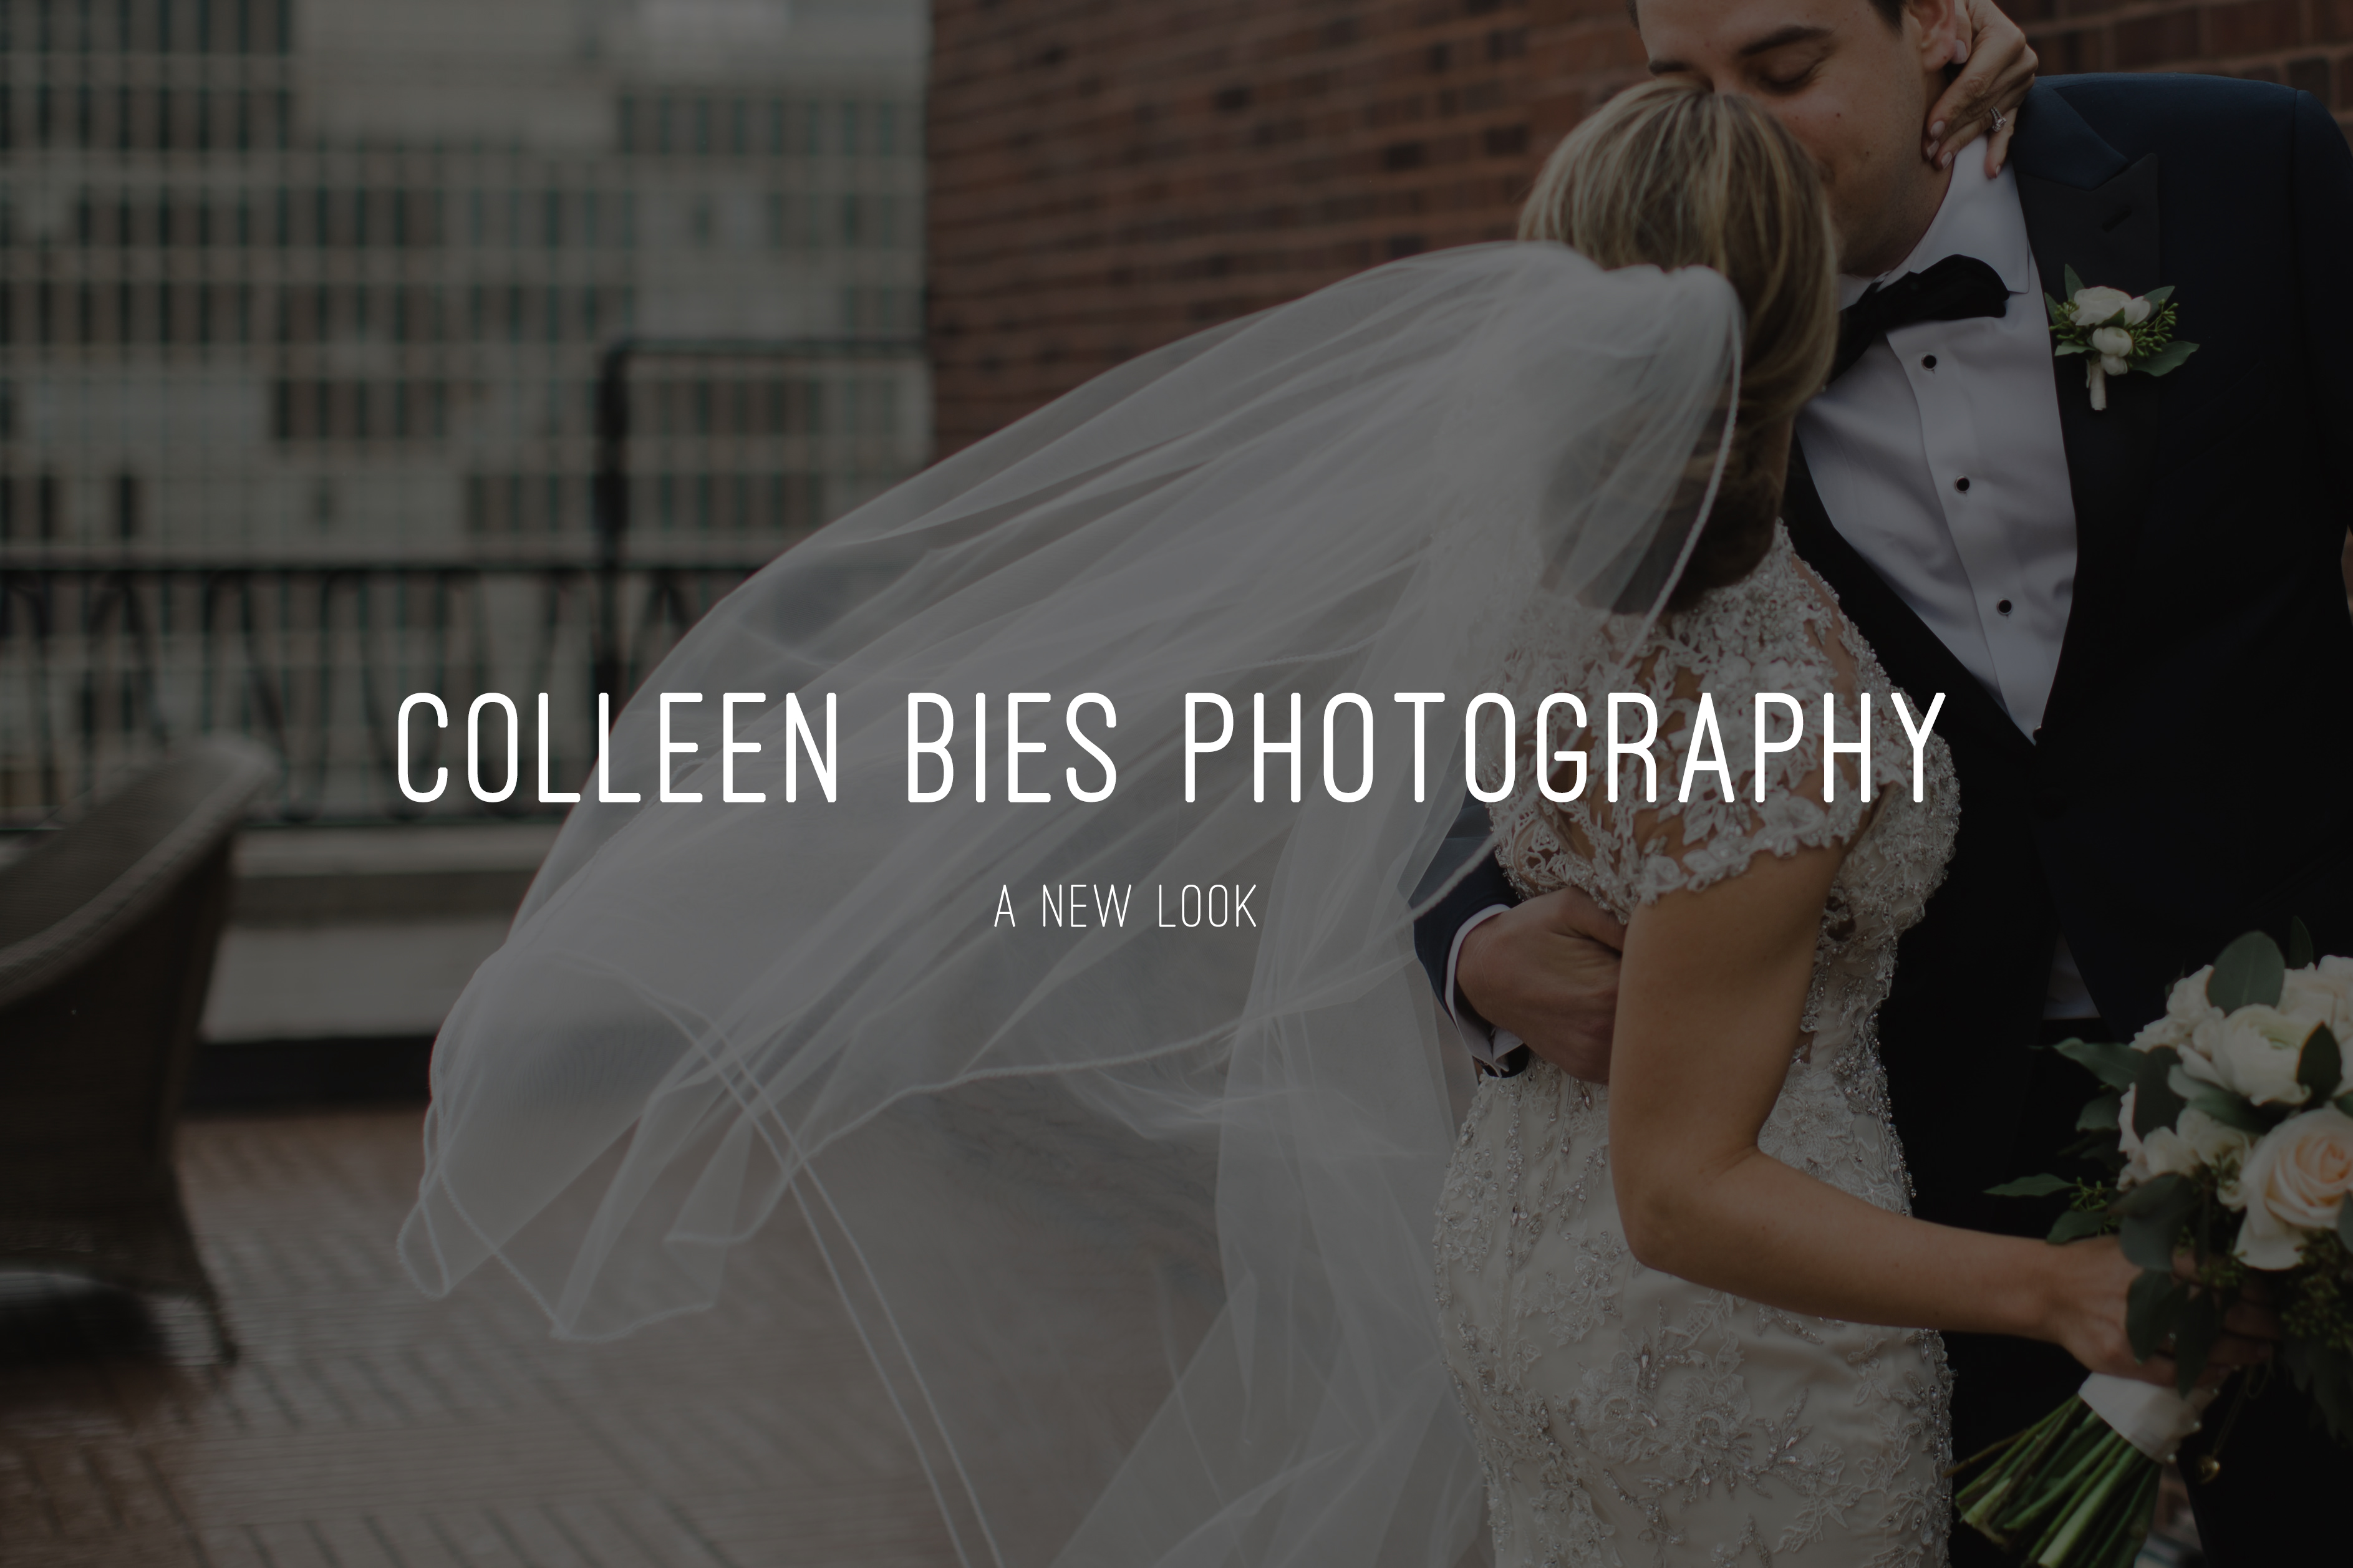 Colleen Bies Photography